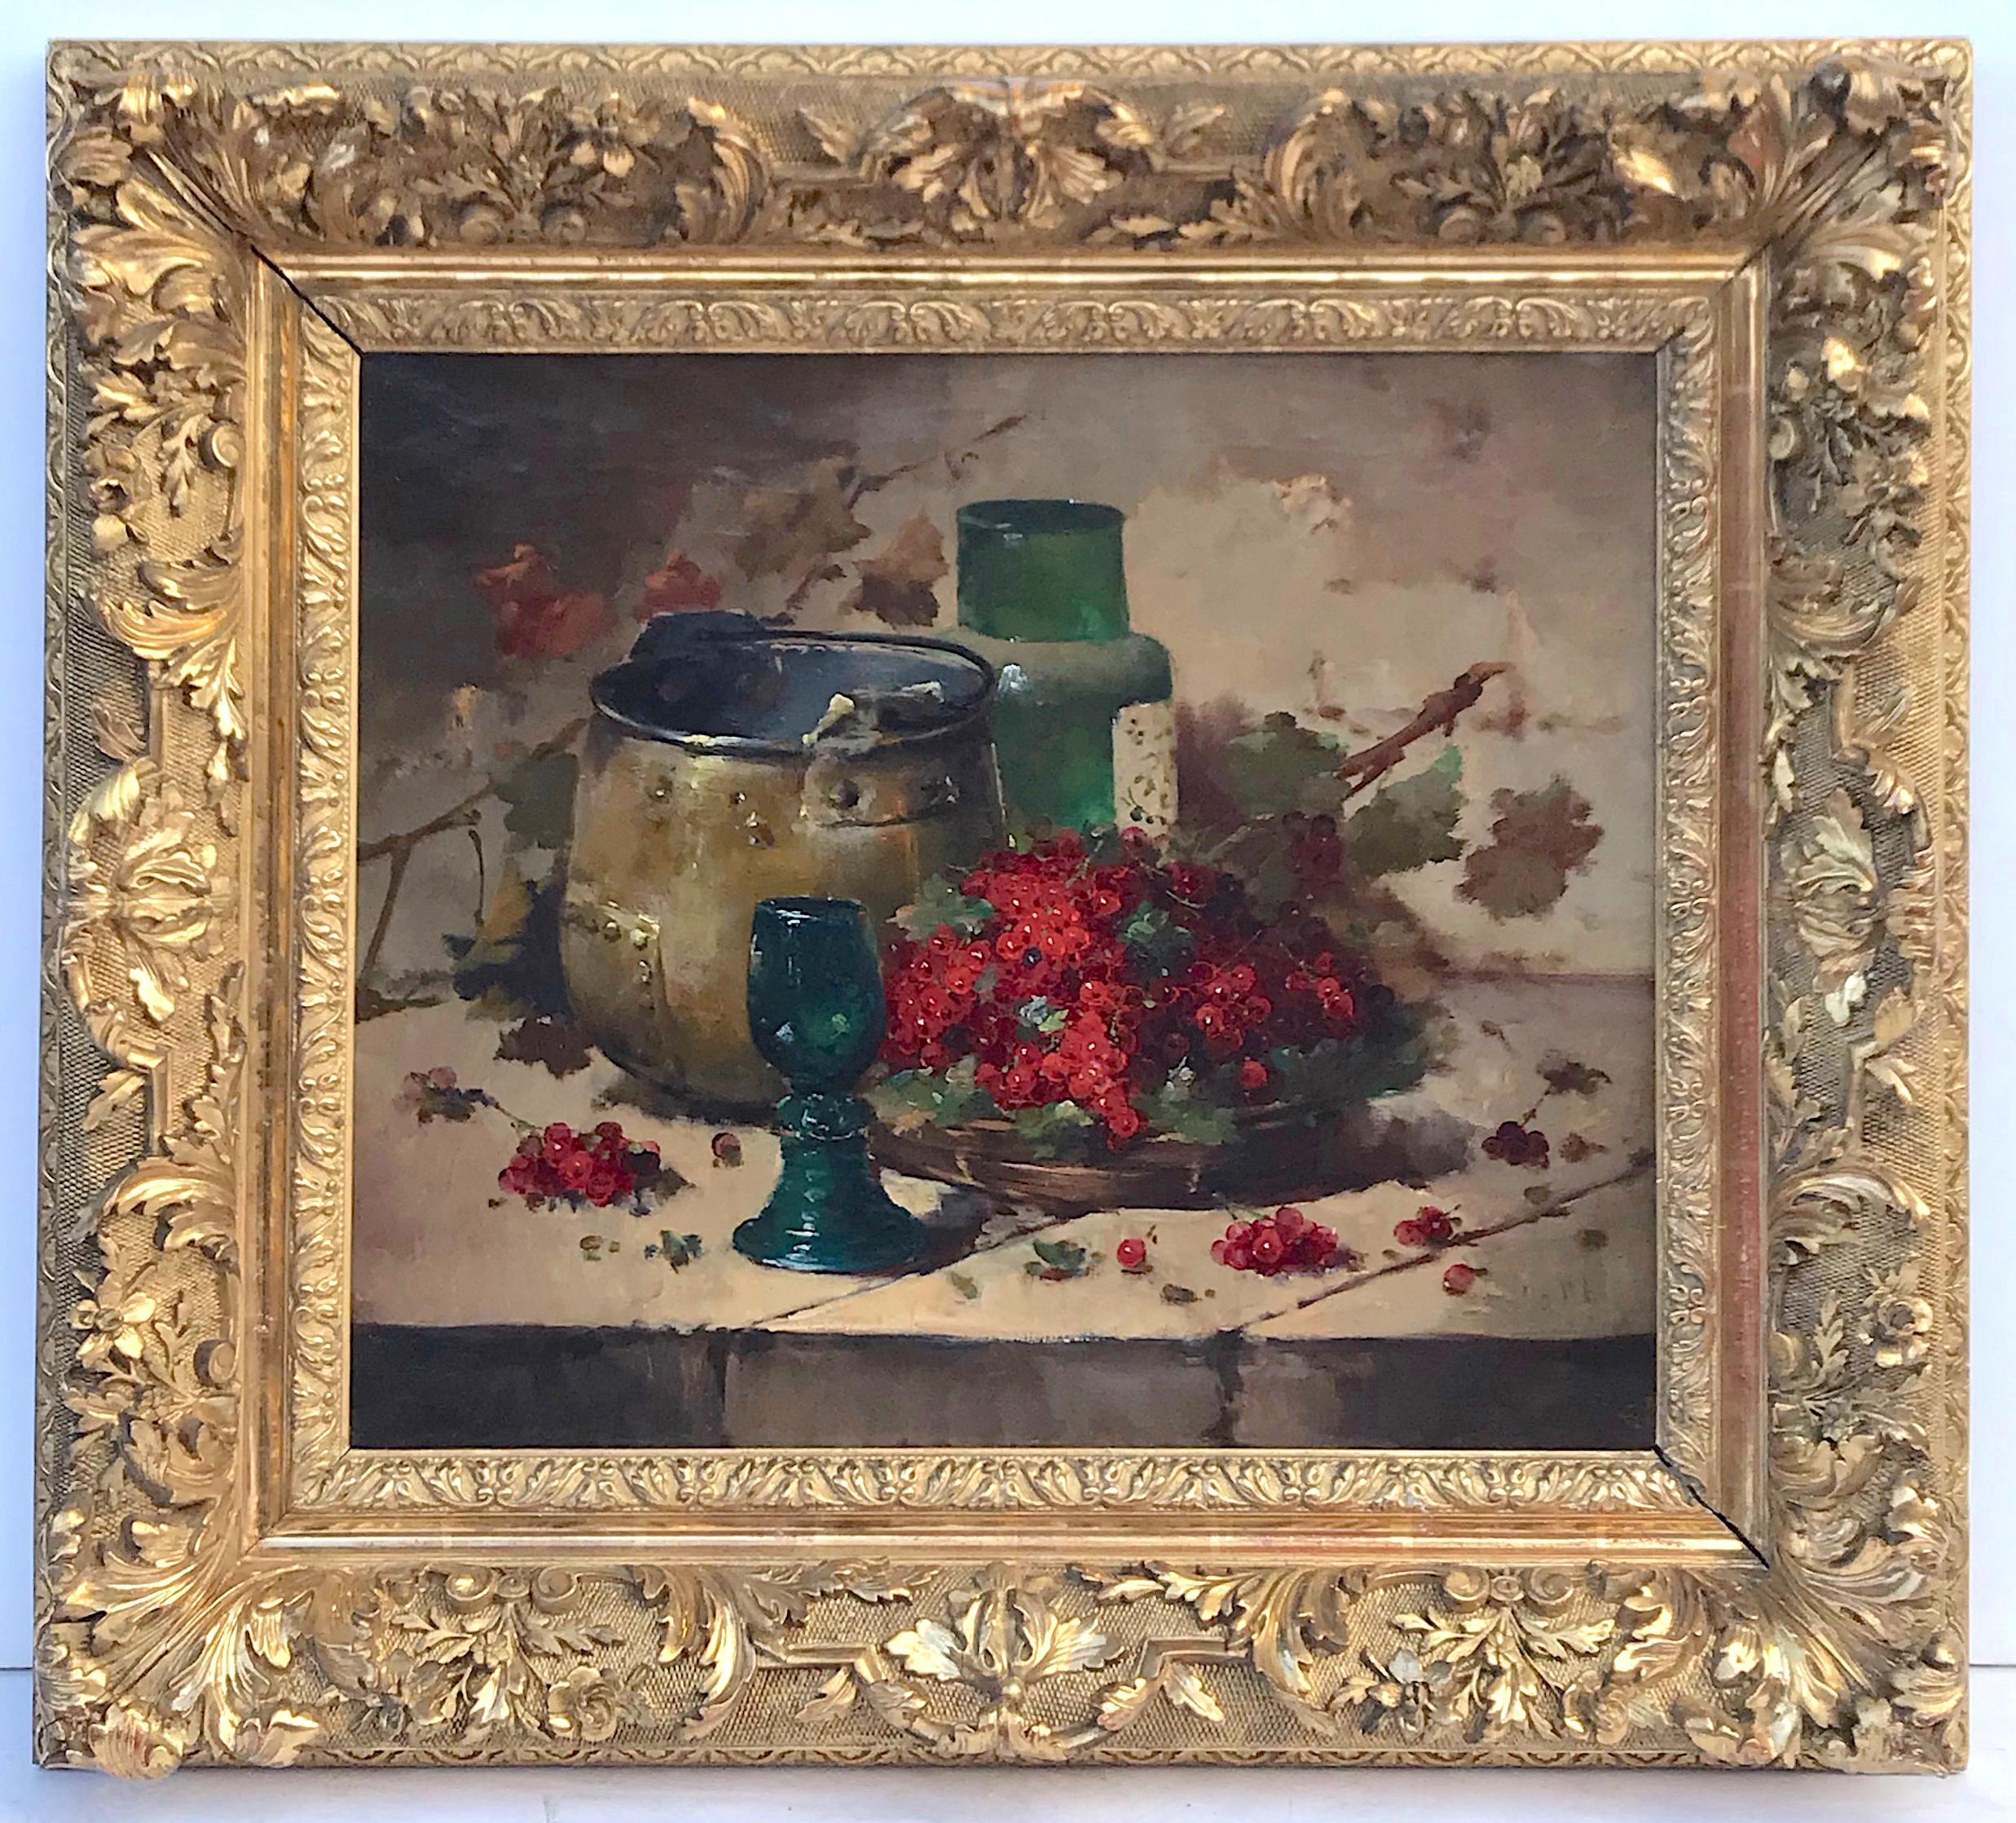 GODCHAUX Emile (1860)
Compositions of Fruits in Pair
Oil on canvas signed low right
Old Frames gilded with gold leaves
Dim canvas (each) : 46 X 55 cm
Dim frame (each) : 61 x 79 cm

GODCHAUX Emile (1860 - nc)
French School - XIXth century 
Born in